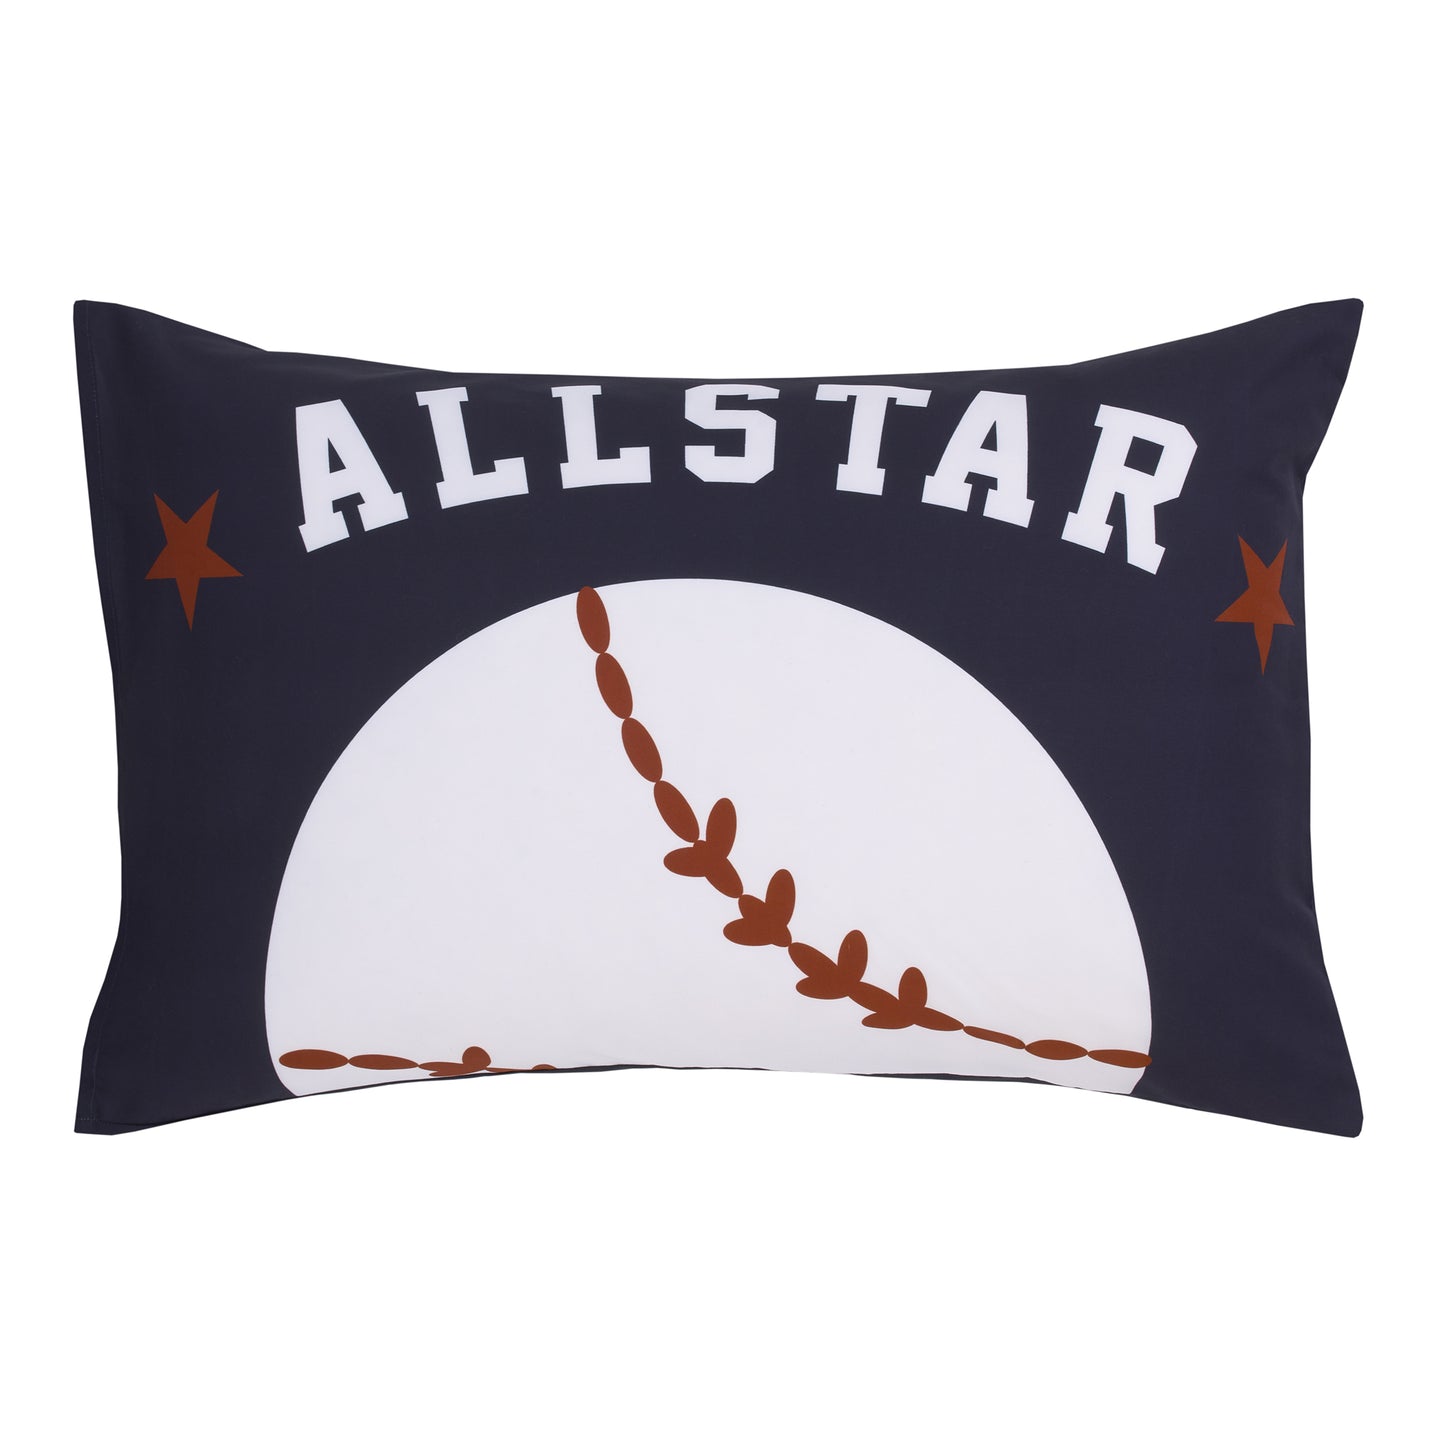 Everything Kids Sports Gray, Navy, Orange, and Brown Allstar 4 Piece Toddler Bed Set - Comforter, Fitted Bottom Sheet, Flat Top Sheet, and Reversible Pillowcase